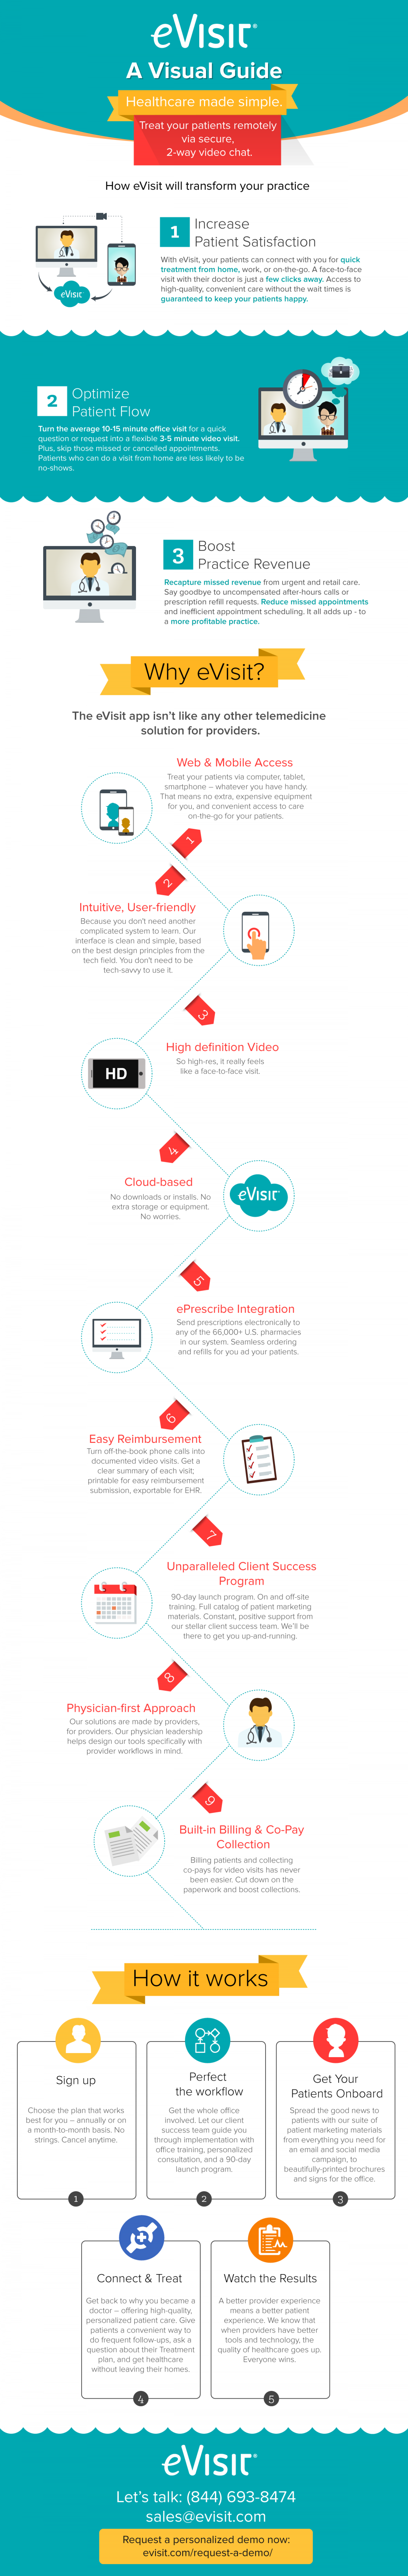 What is eVisit? Infographic